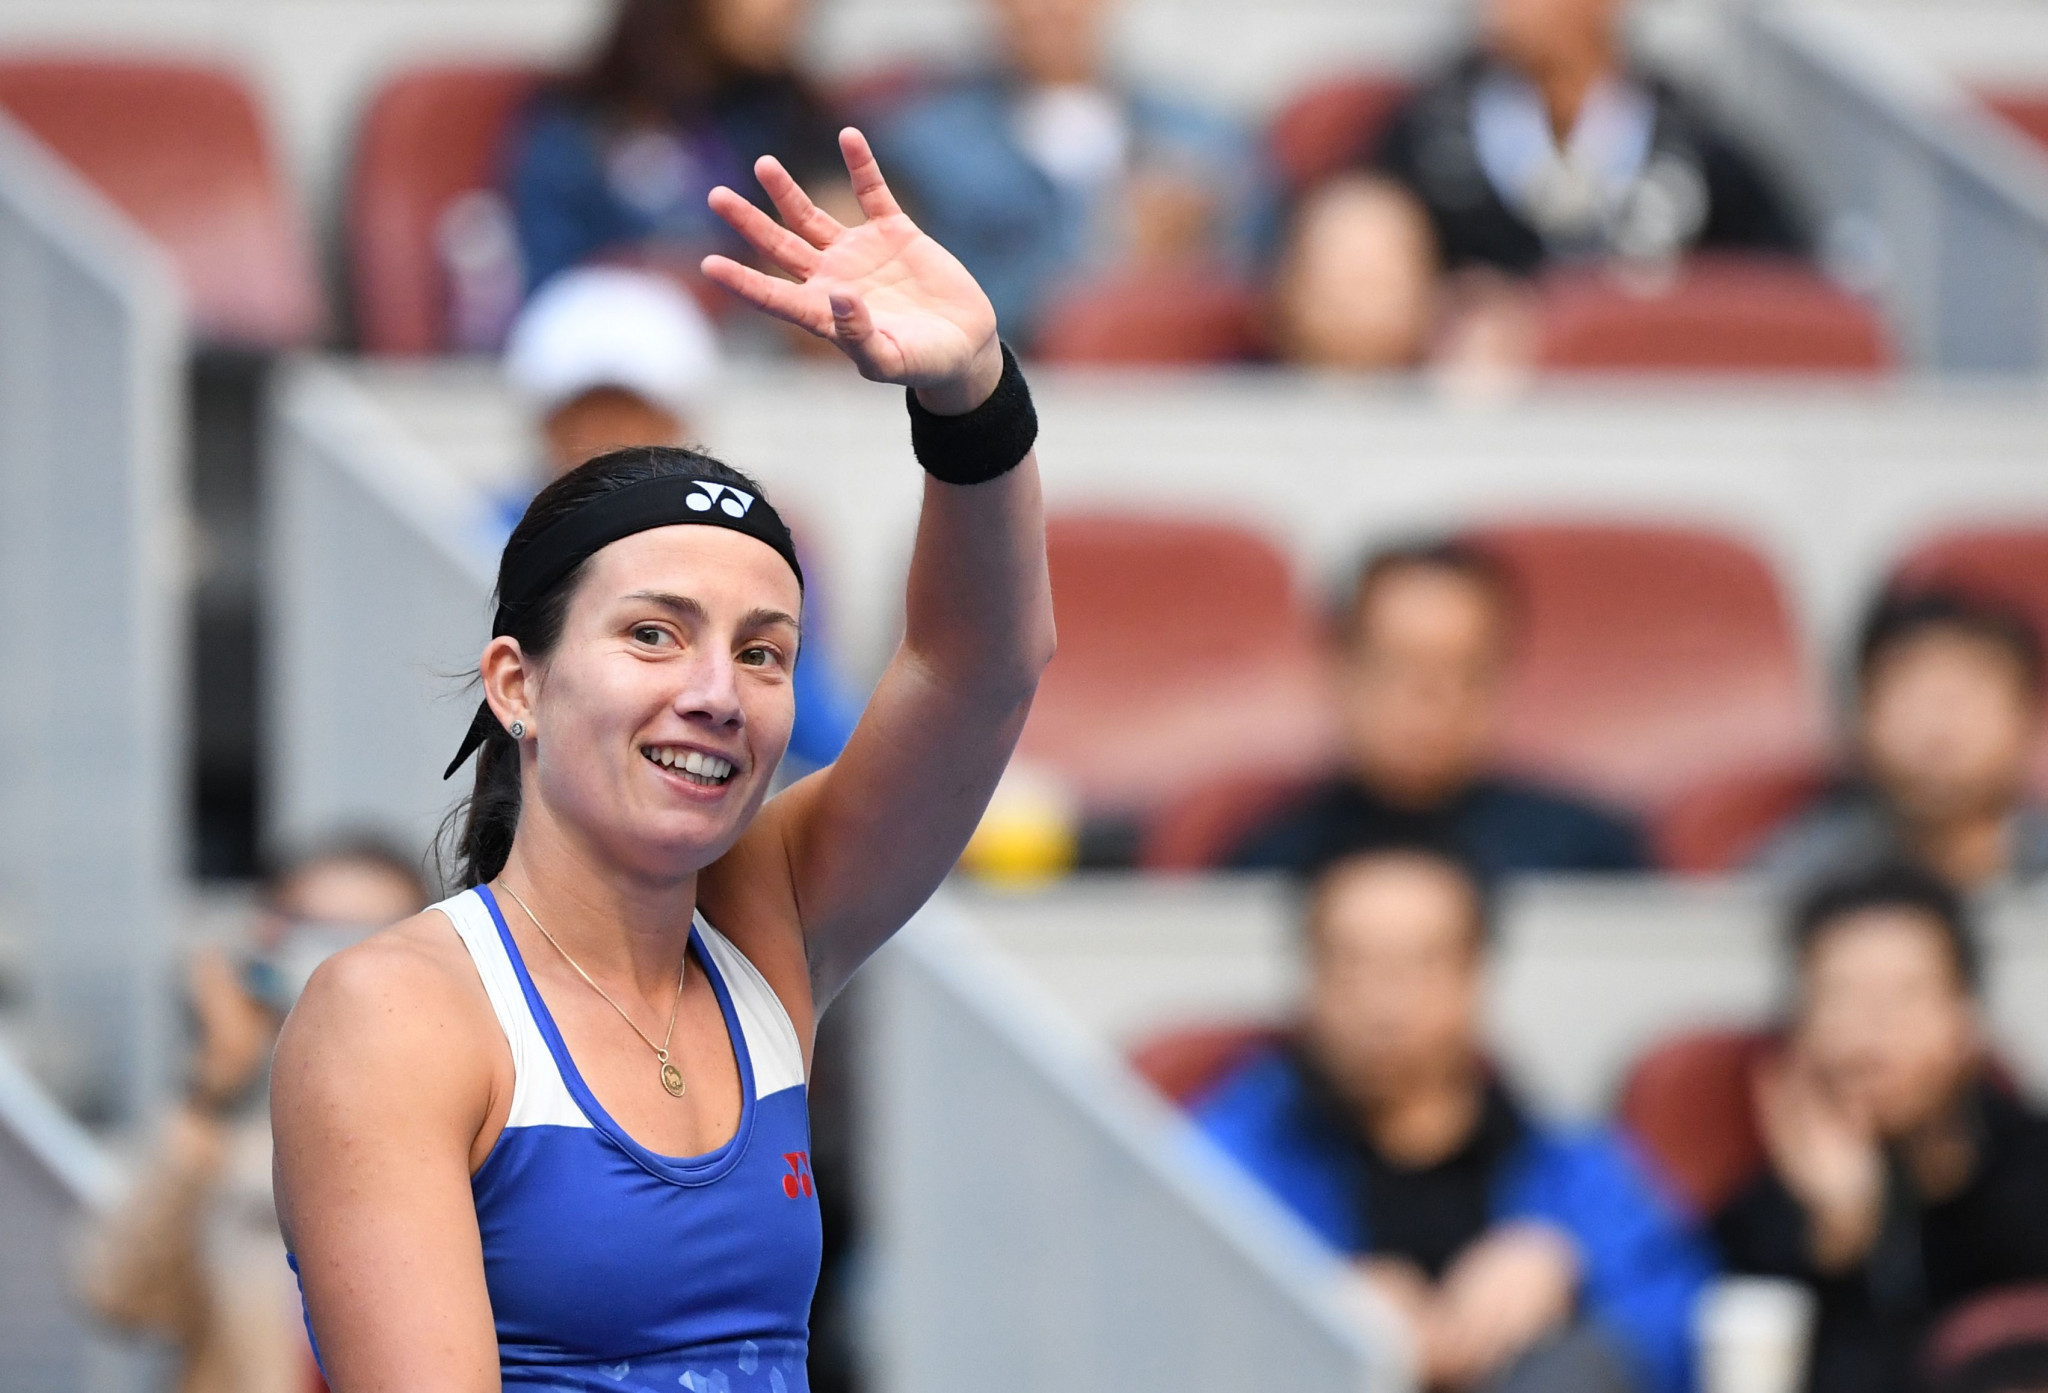 Anastasija Sevastova will be hoping to get her first win over Caroline Wozniacki when they face off in the WTA China Open final ©Getty Images